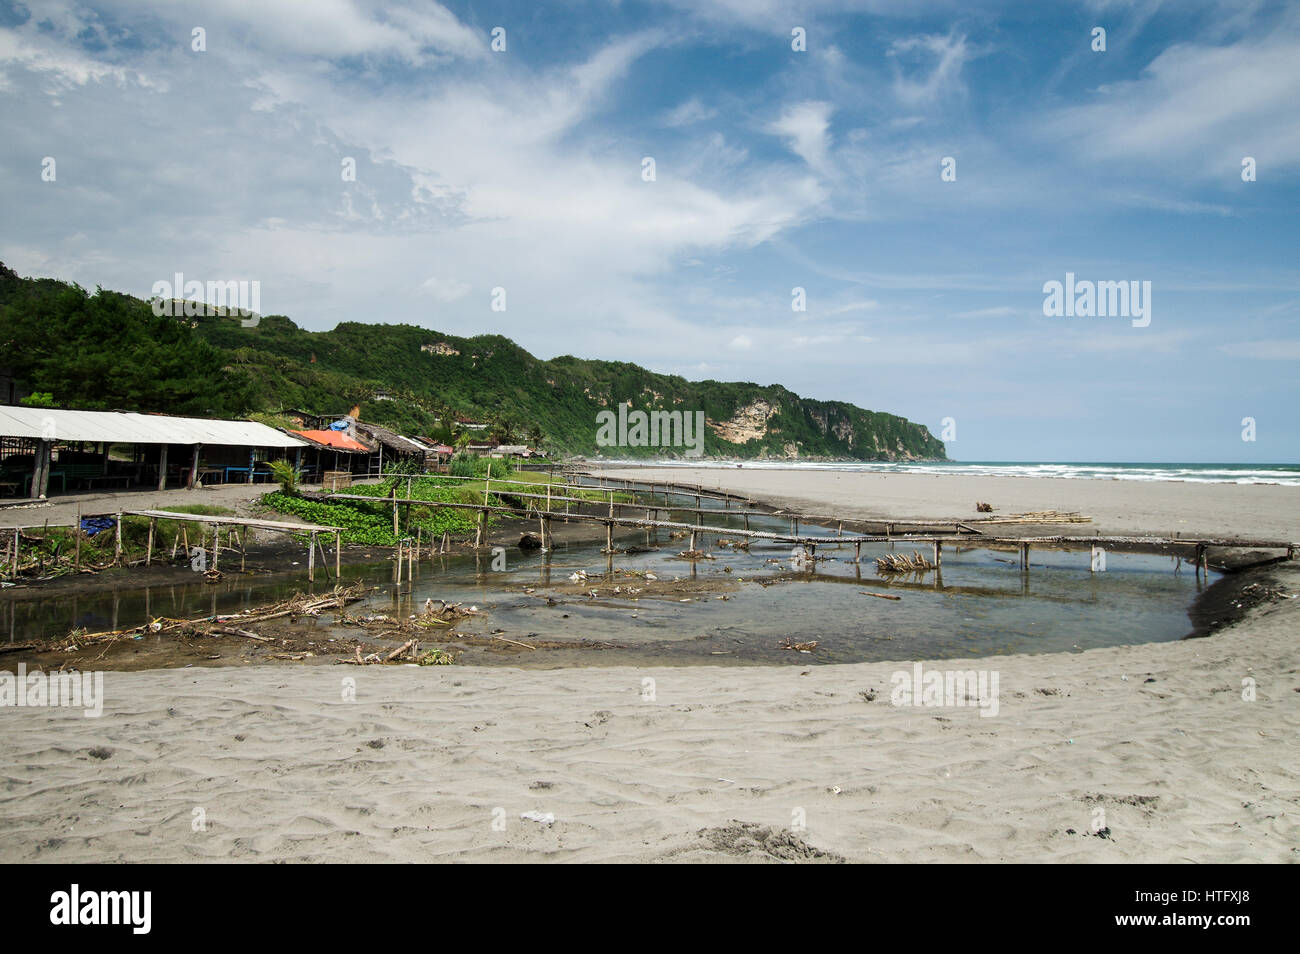 Dilapidated shacks on the beautiful Parangtritis Beach in Central Java, Indonesia Stock Photo